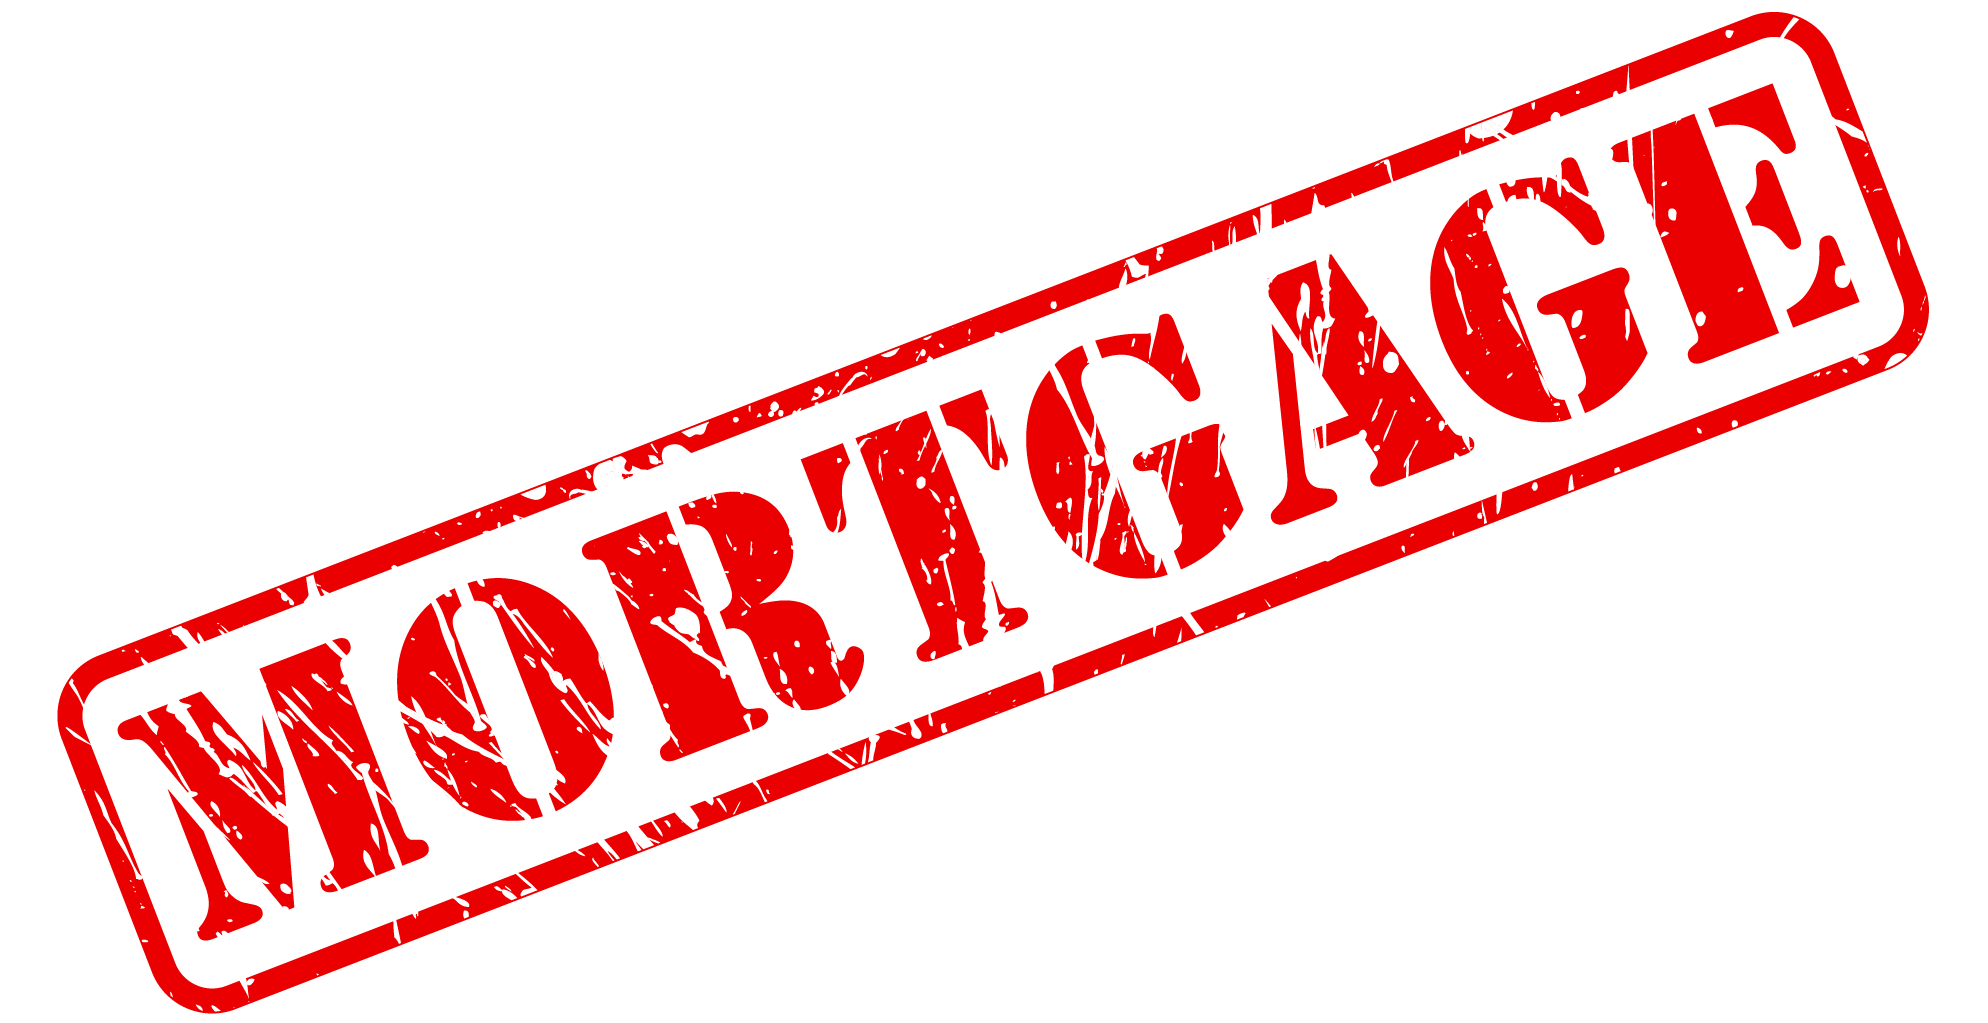 Should I Pay Off My Rental Mortgage?